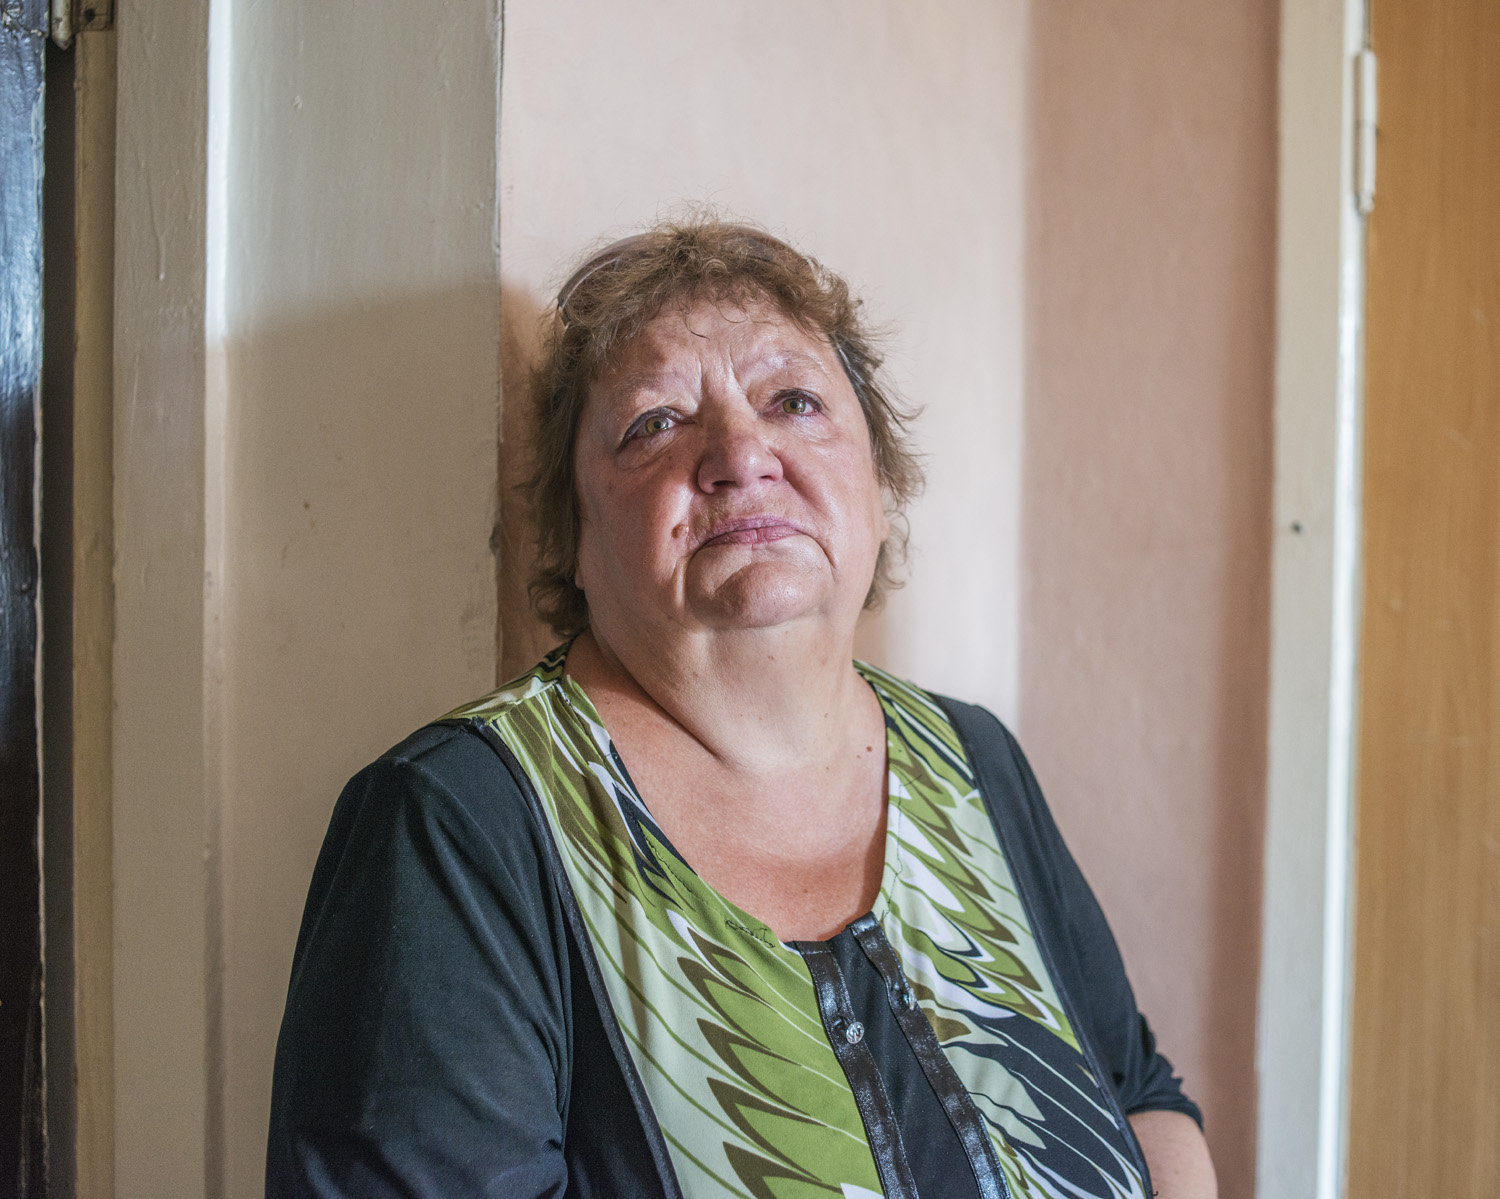  Lyubov, 64, fled shelling in Donetsk to stay in a government-assisted shelter in the city of Mariupol. 